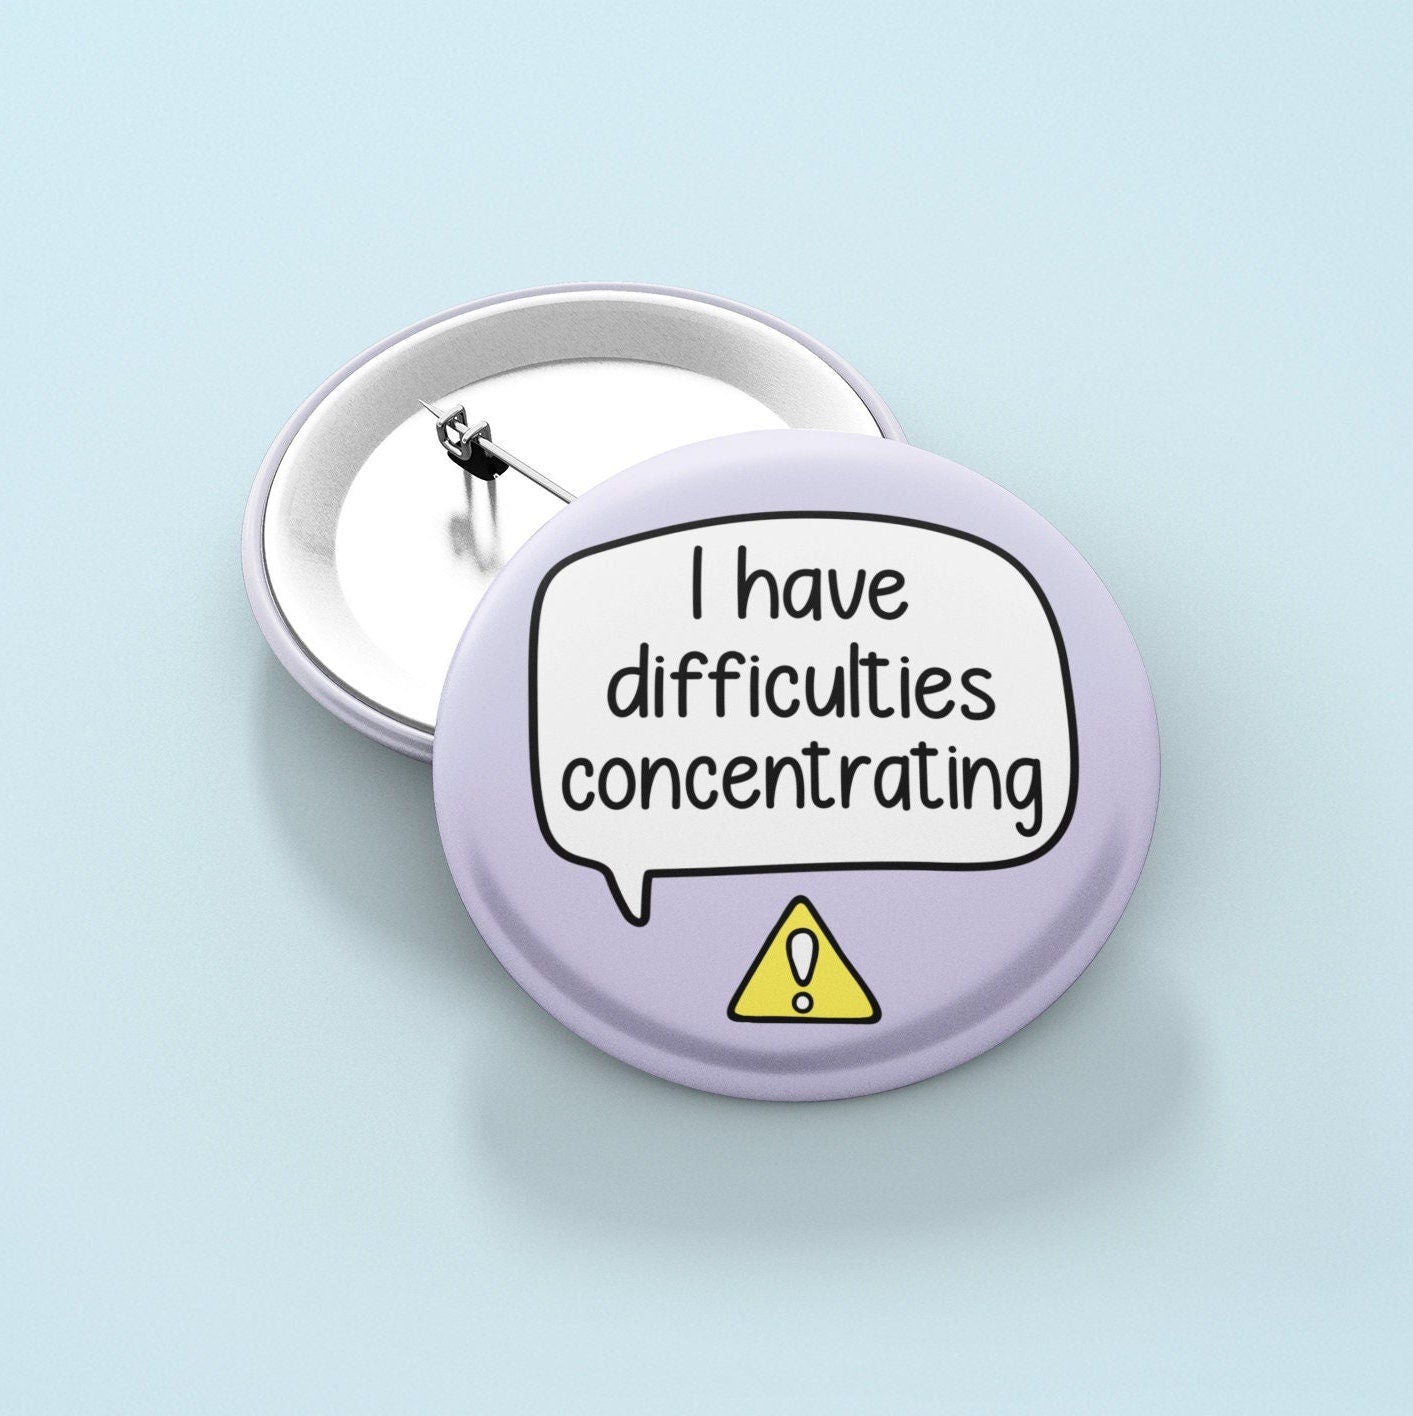 I Have Difficulties Concentrating Badge Pin | ADHD Awareness - Attention Deficit